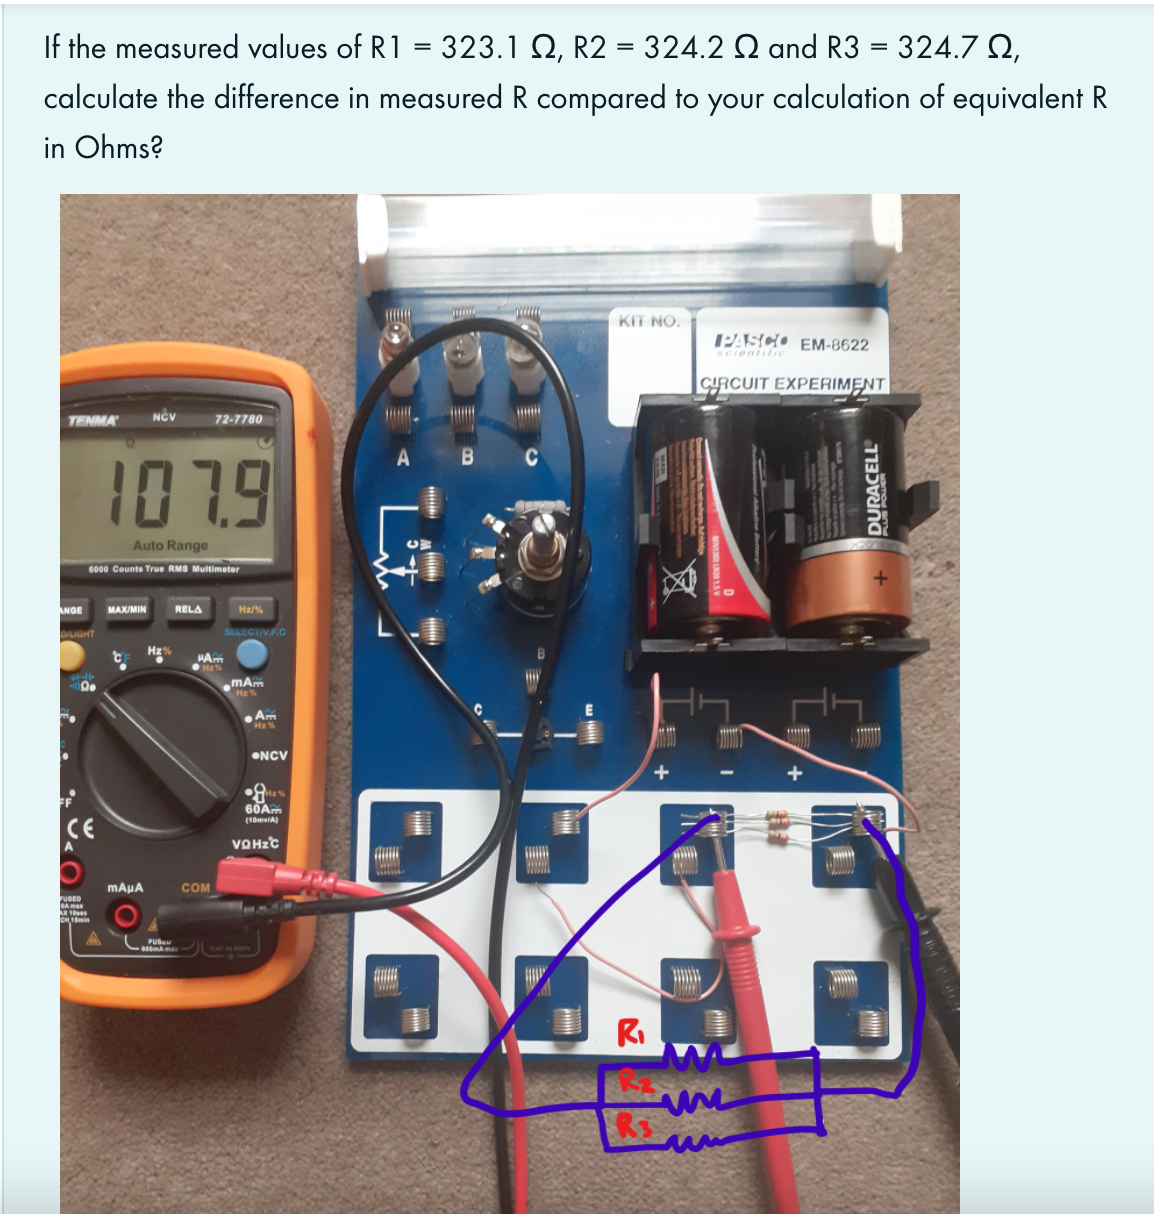 If the measured values of R1 = 323.1 Q, R2 = 324.2 Q and R3 = 324.7 Q,
calculate the difference in measured R compared to your calculation of equivalent R
in Ohms?
KIT NO.
1PASCO EM-8622
SCIentfic
CYRCUIT EXPERIMENT
TENMA
72-7780
1079
A
C
Auto Range
6000 Counte True RMS Multimeter
ANGE
MAX/MIN
RELA
Hz/%
DILIGHT
SELECTIVR.C
Hz%
mA
H
Am
Hz%
ONCV
60A.
CE
A
(10mviA)
VOHZC
ww
COM
FUSED
FUB
RI
